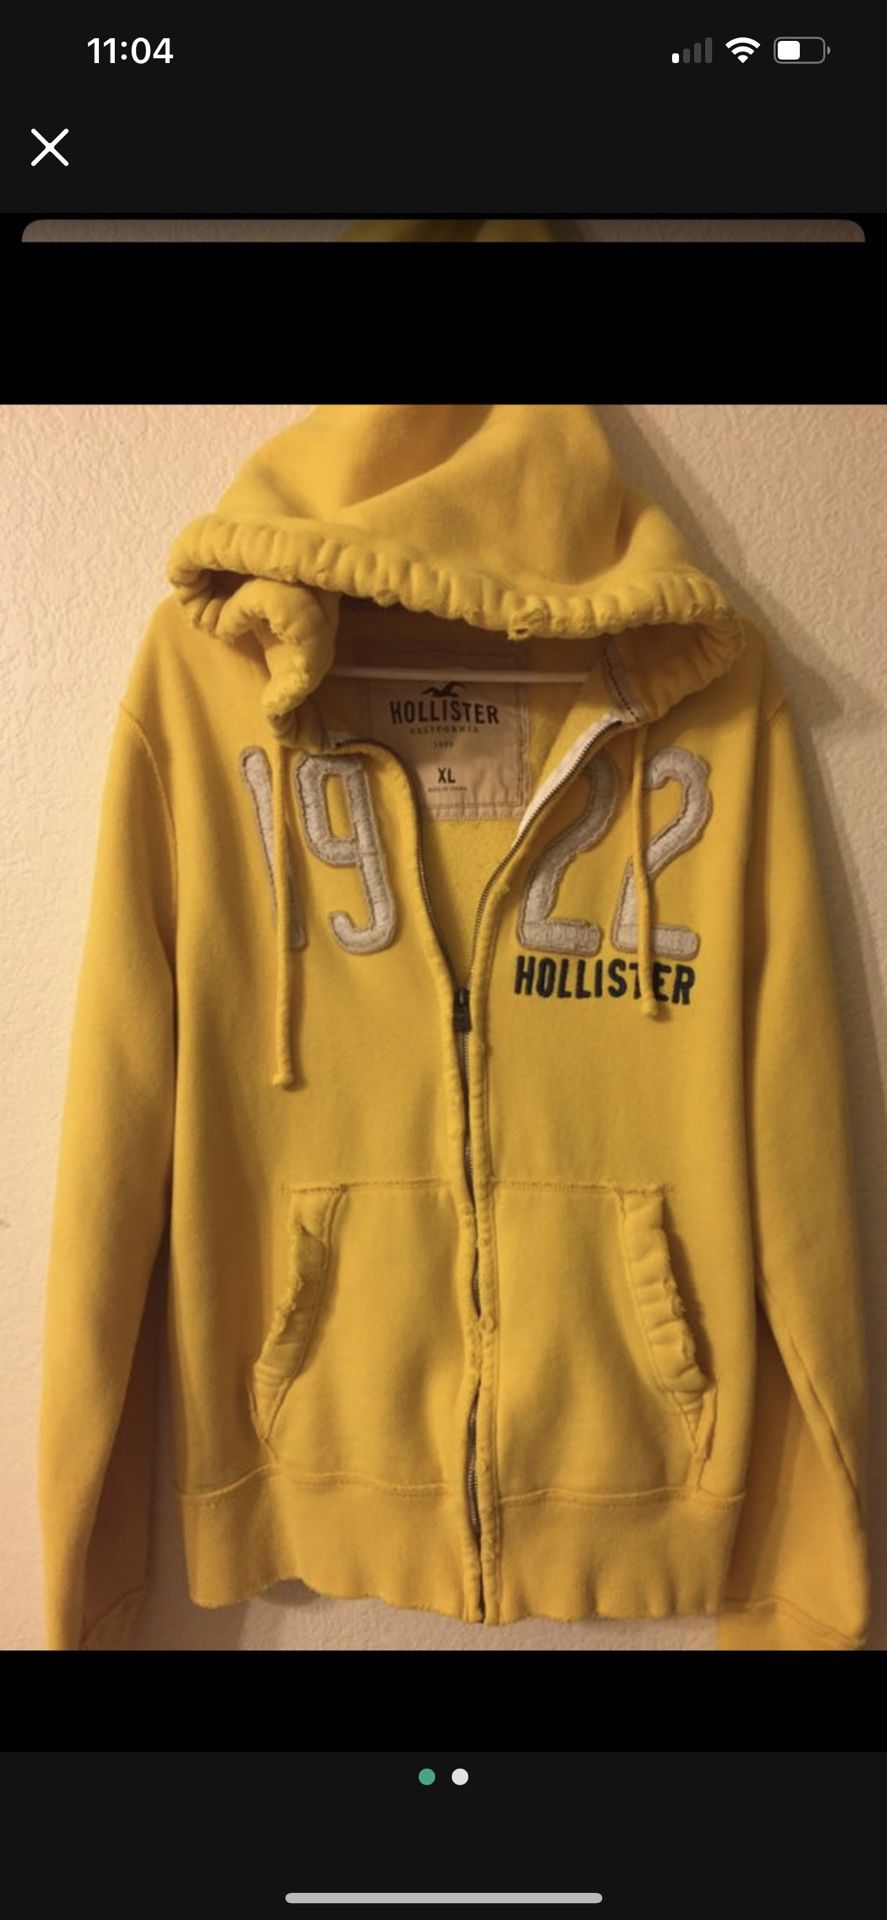 HOLLISTER HOODIE JACKET (Not torn! This is the style.)